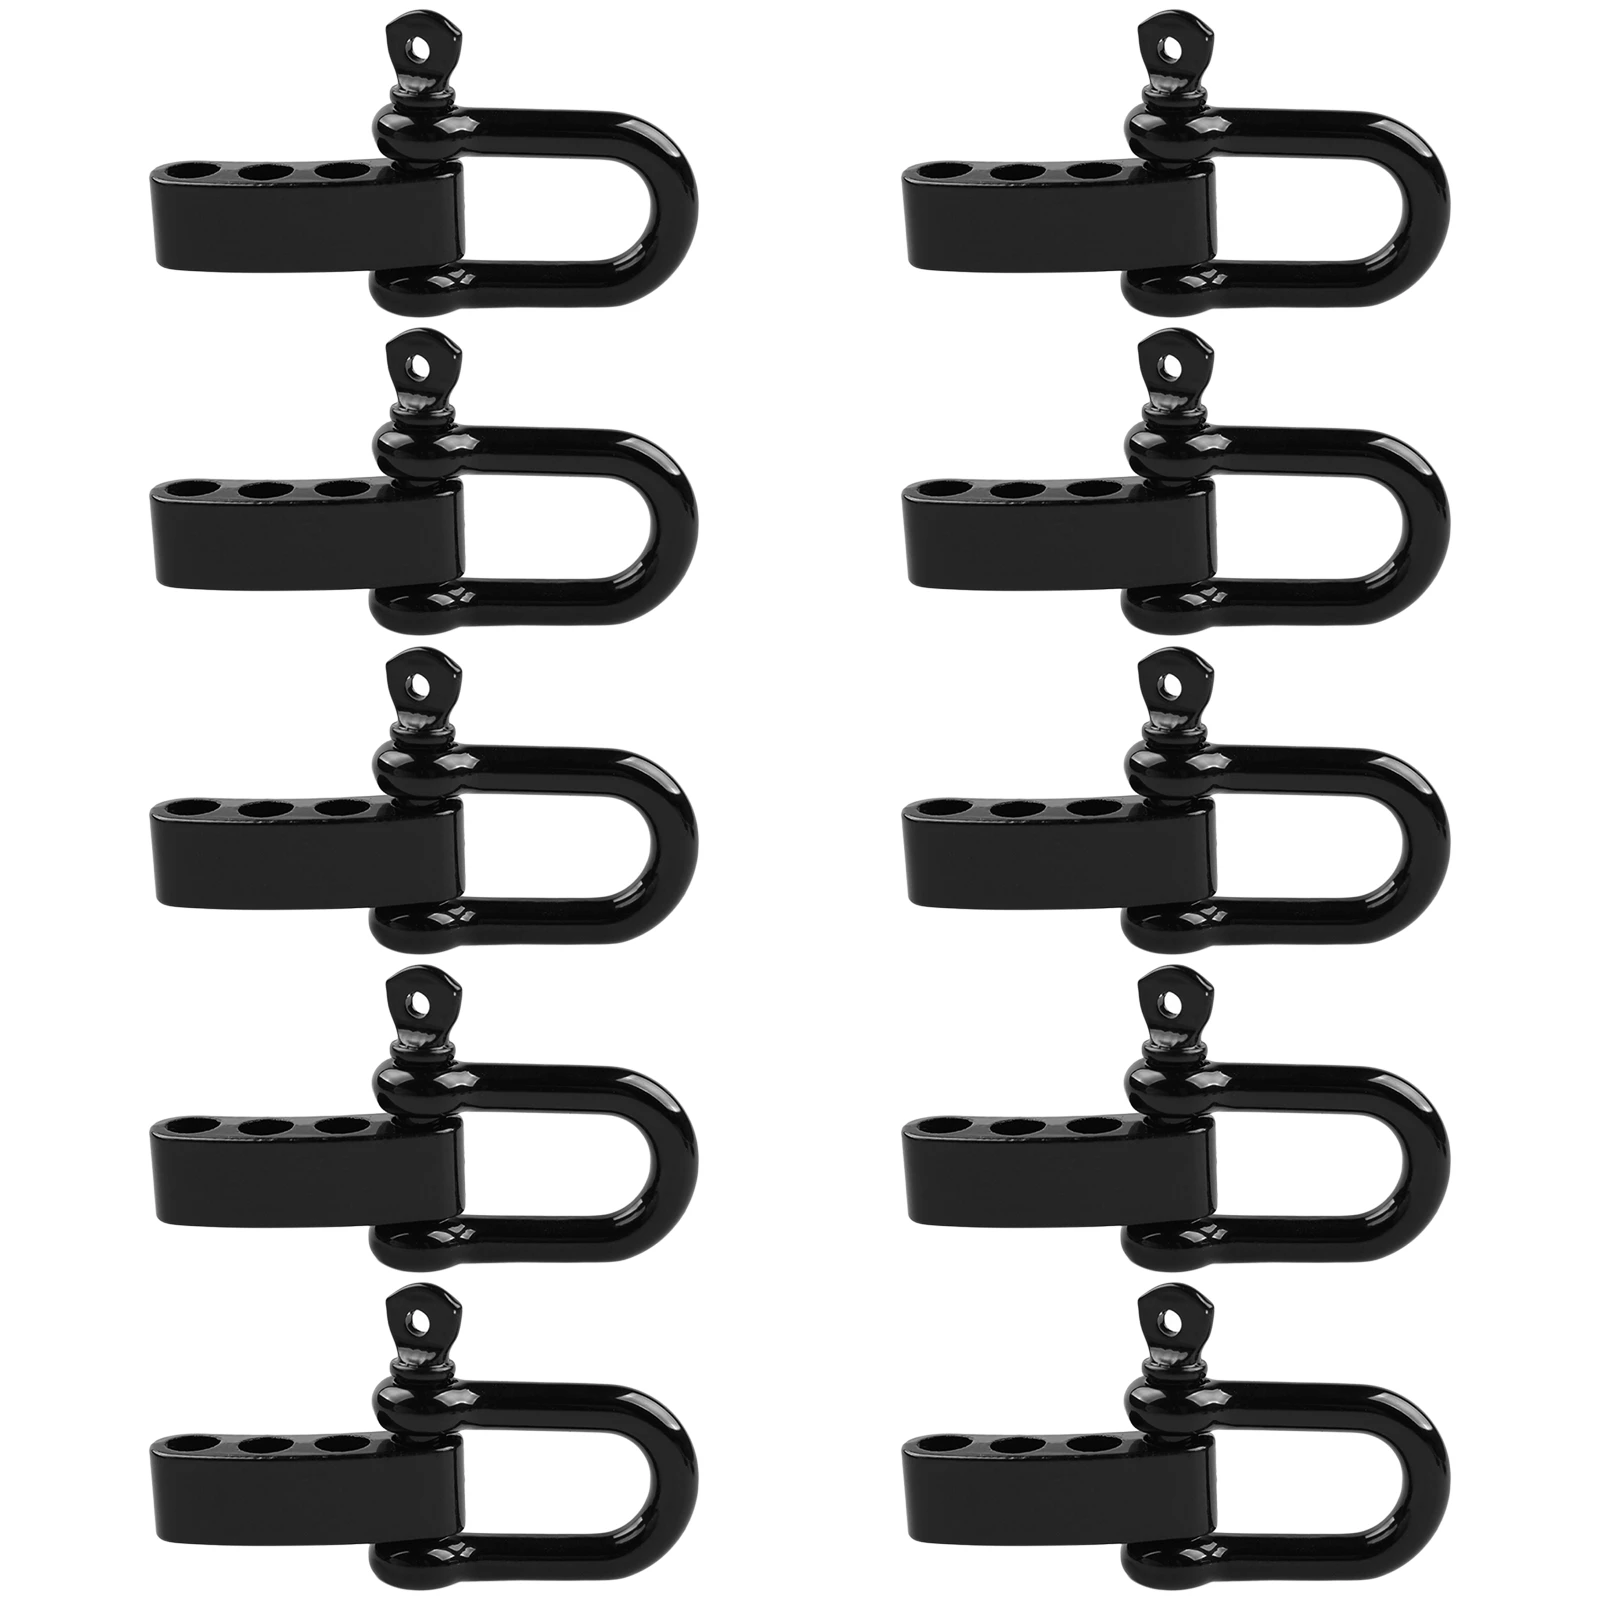 

Lixada 10PCS U Shape Anchor Shackle Outdoor Rope Paracord Bracelet Adjustable Buckle Stainless Steel Buckle Camping Equioment